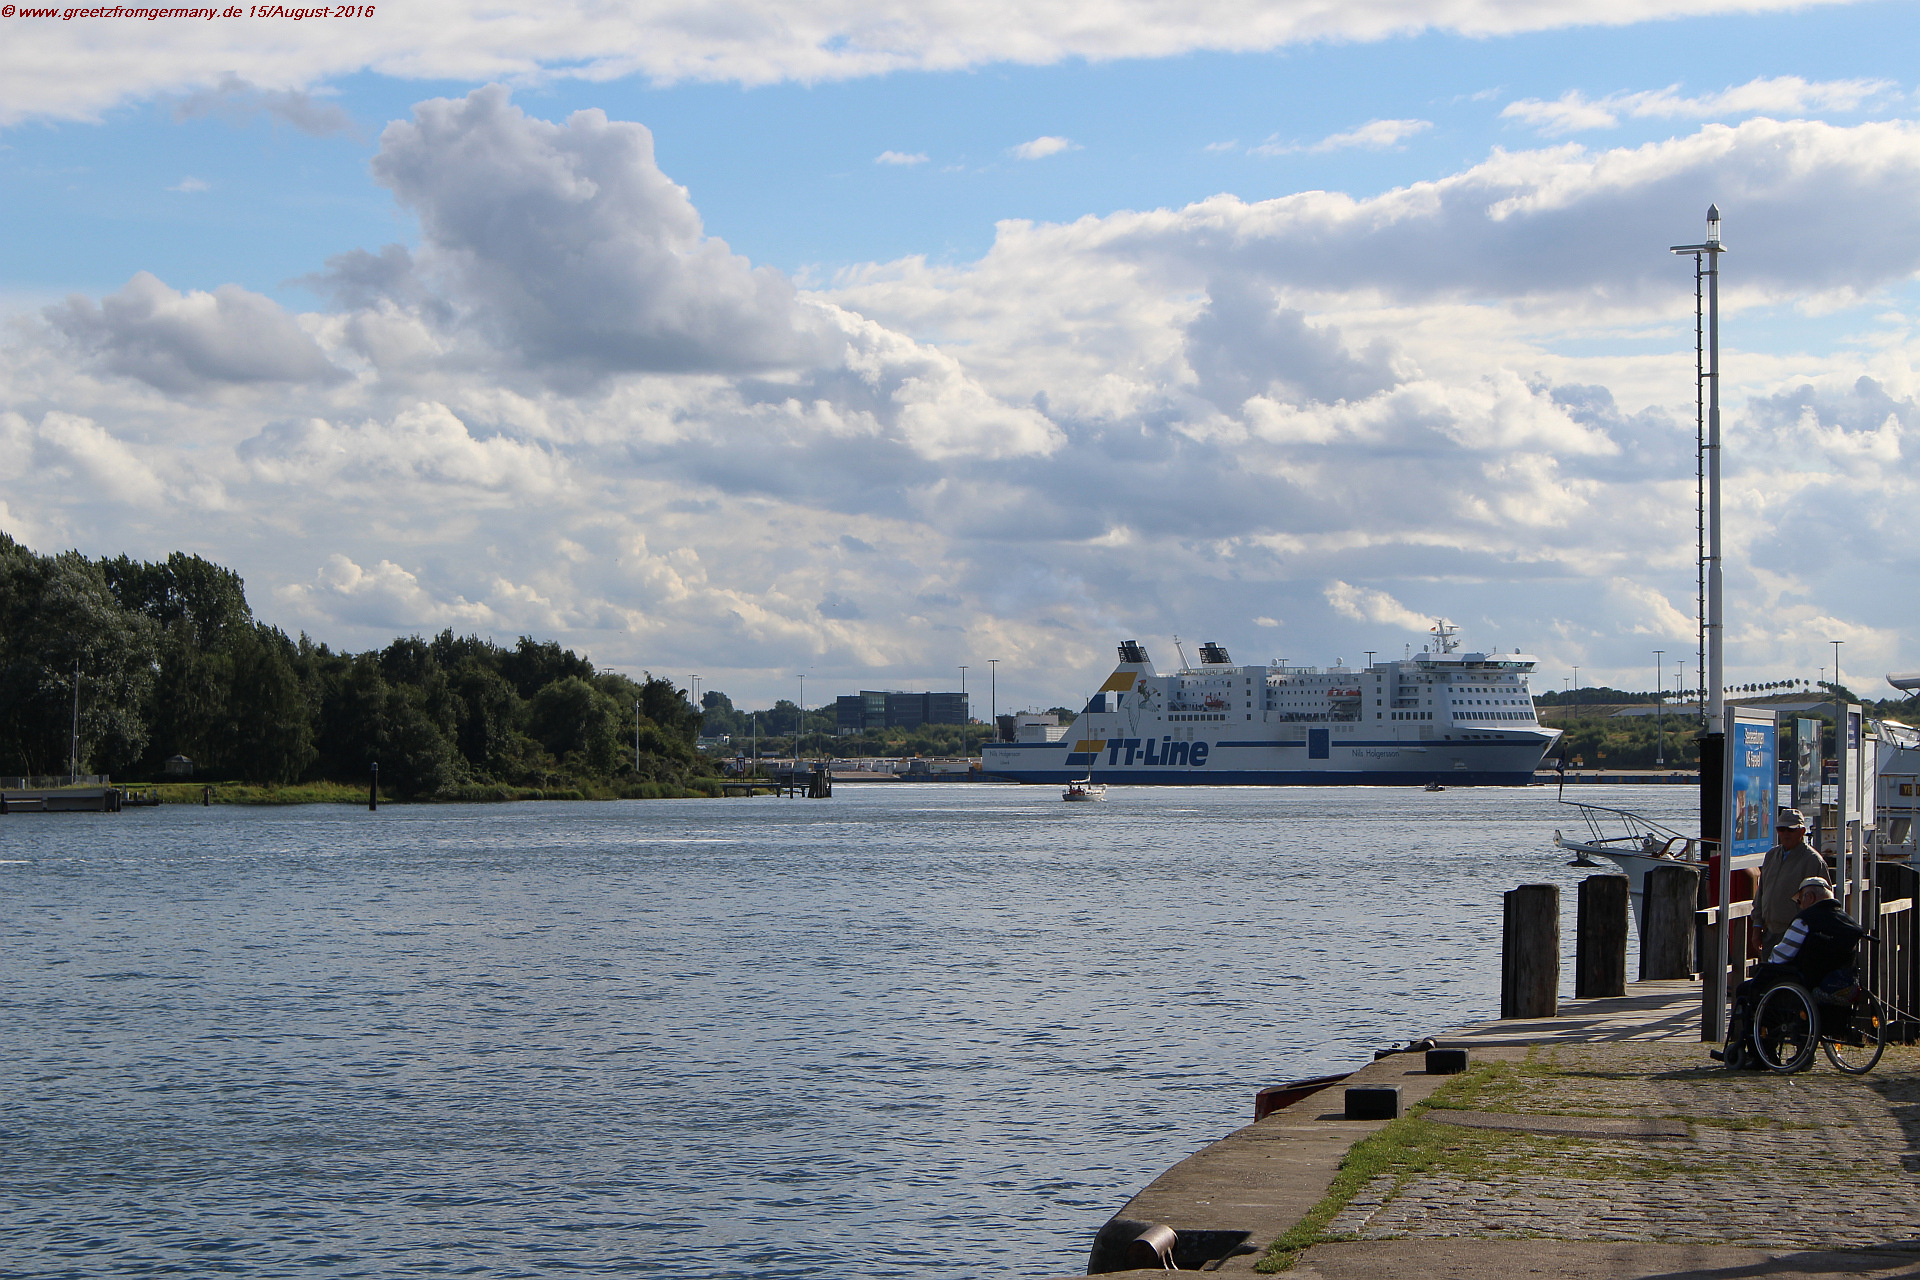 In Travemünde, big and small meet: River Trave meets the Baltic Sea, and the small boats that accompanied the blogger along the Trave canal better get out of the way of huge cruise ships.